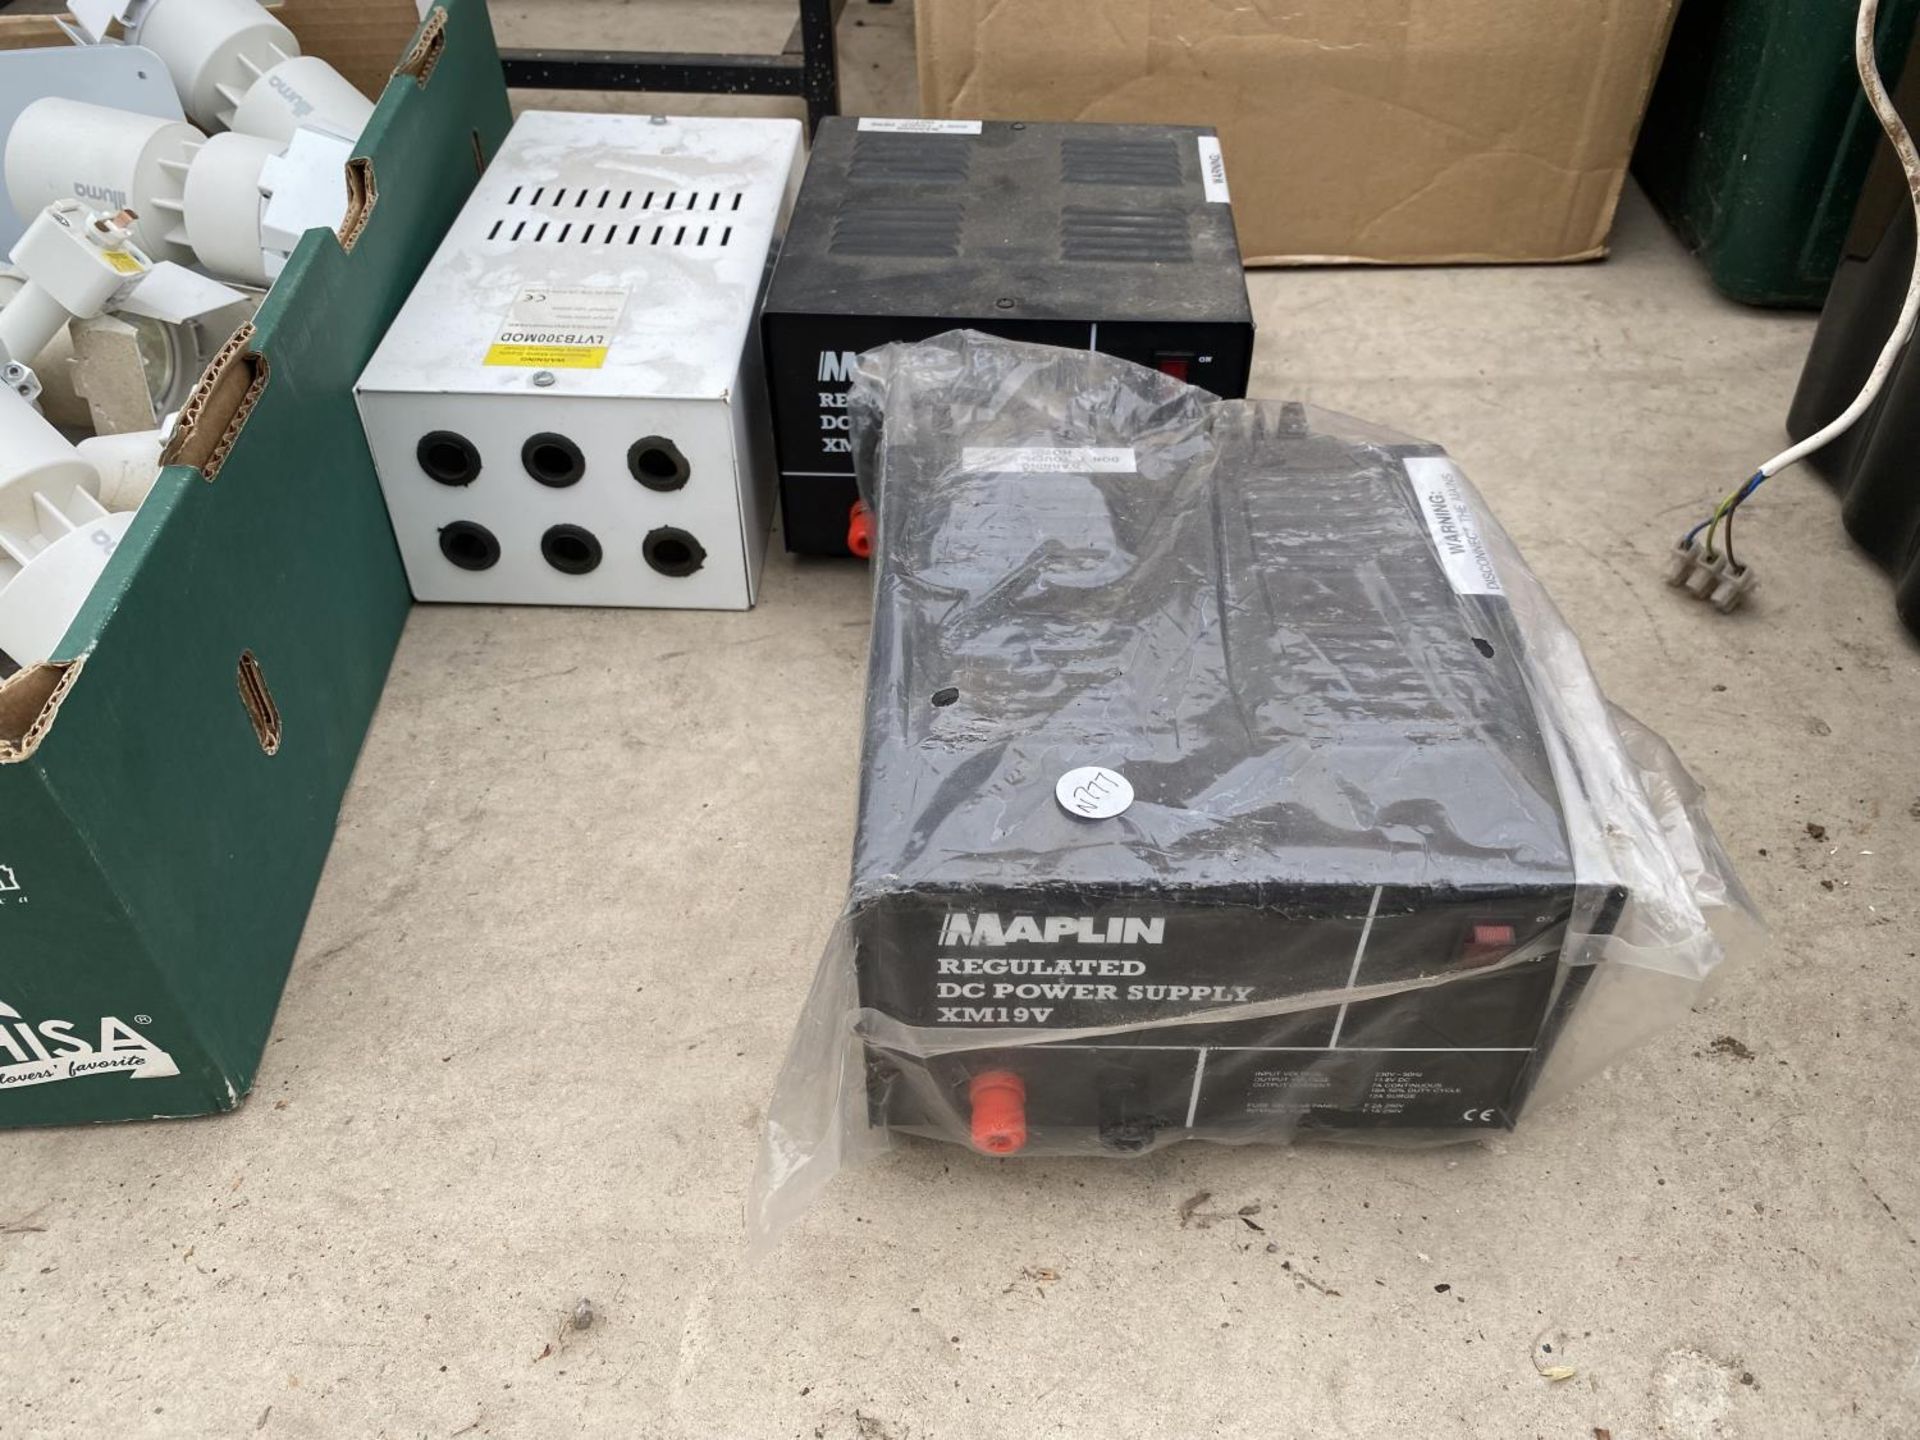 TWO MAPLIN REGULATED POWER SUPPLY UNITS AND AN ASSORTMENT OF ILUMA LIGHT FITTINGS ETC - Image 2 of 3